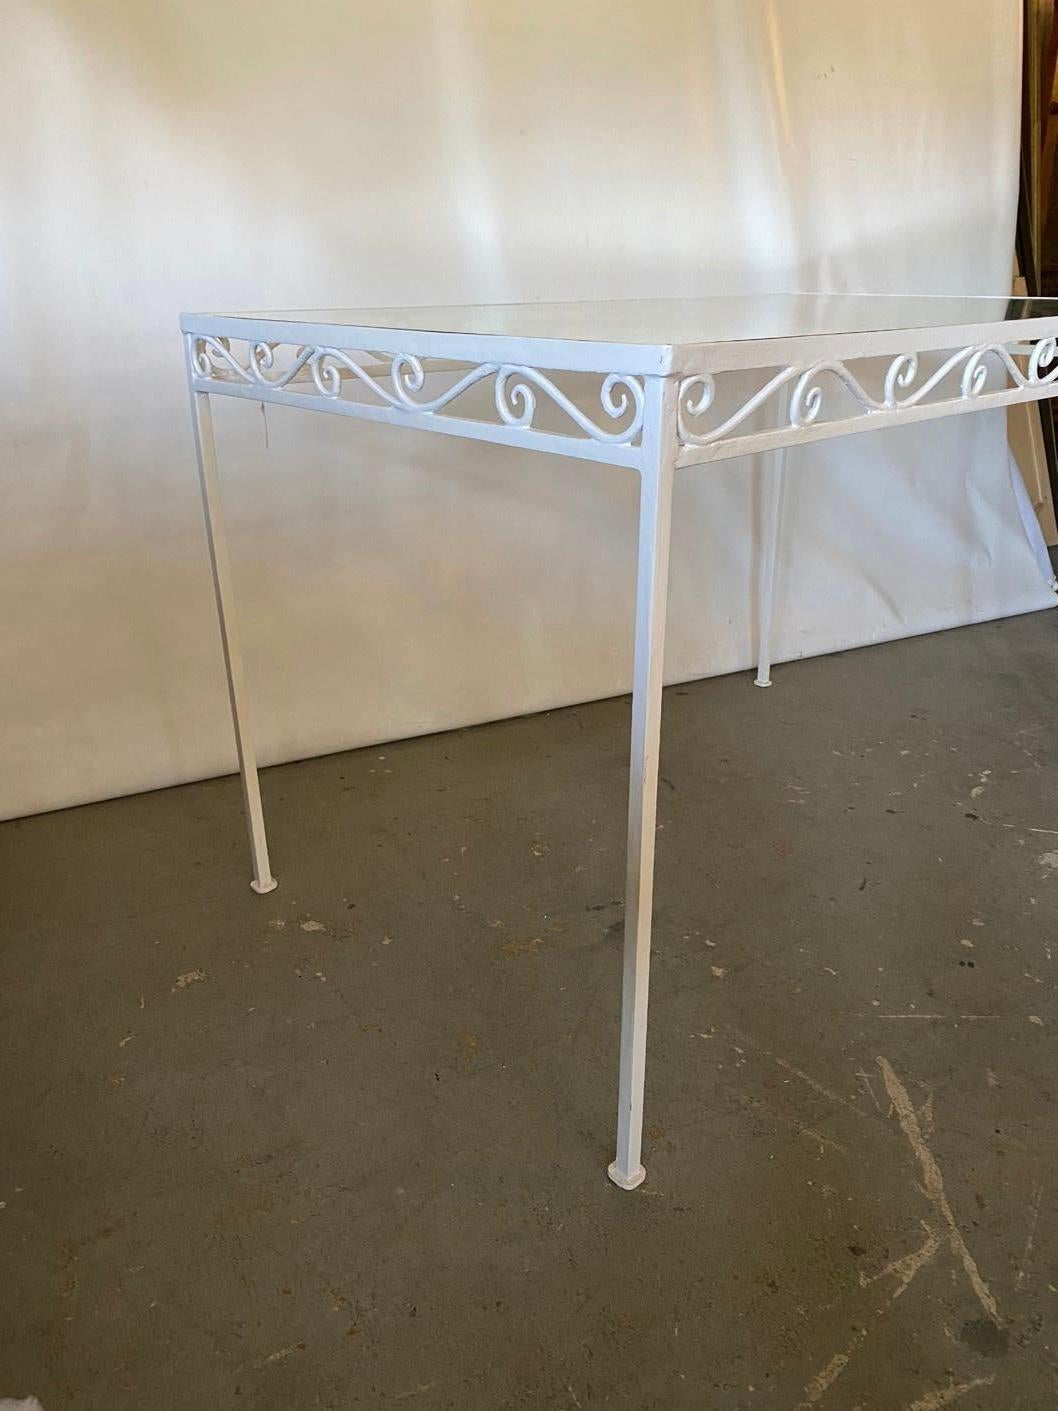 Simple and elegant handwrought dining table with original plate glass top. The wrought frame is finished with a white paint. Originally designed for outdoor or patio use, also suitable for porch or indoor use such as a kitchen table. In the style of